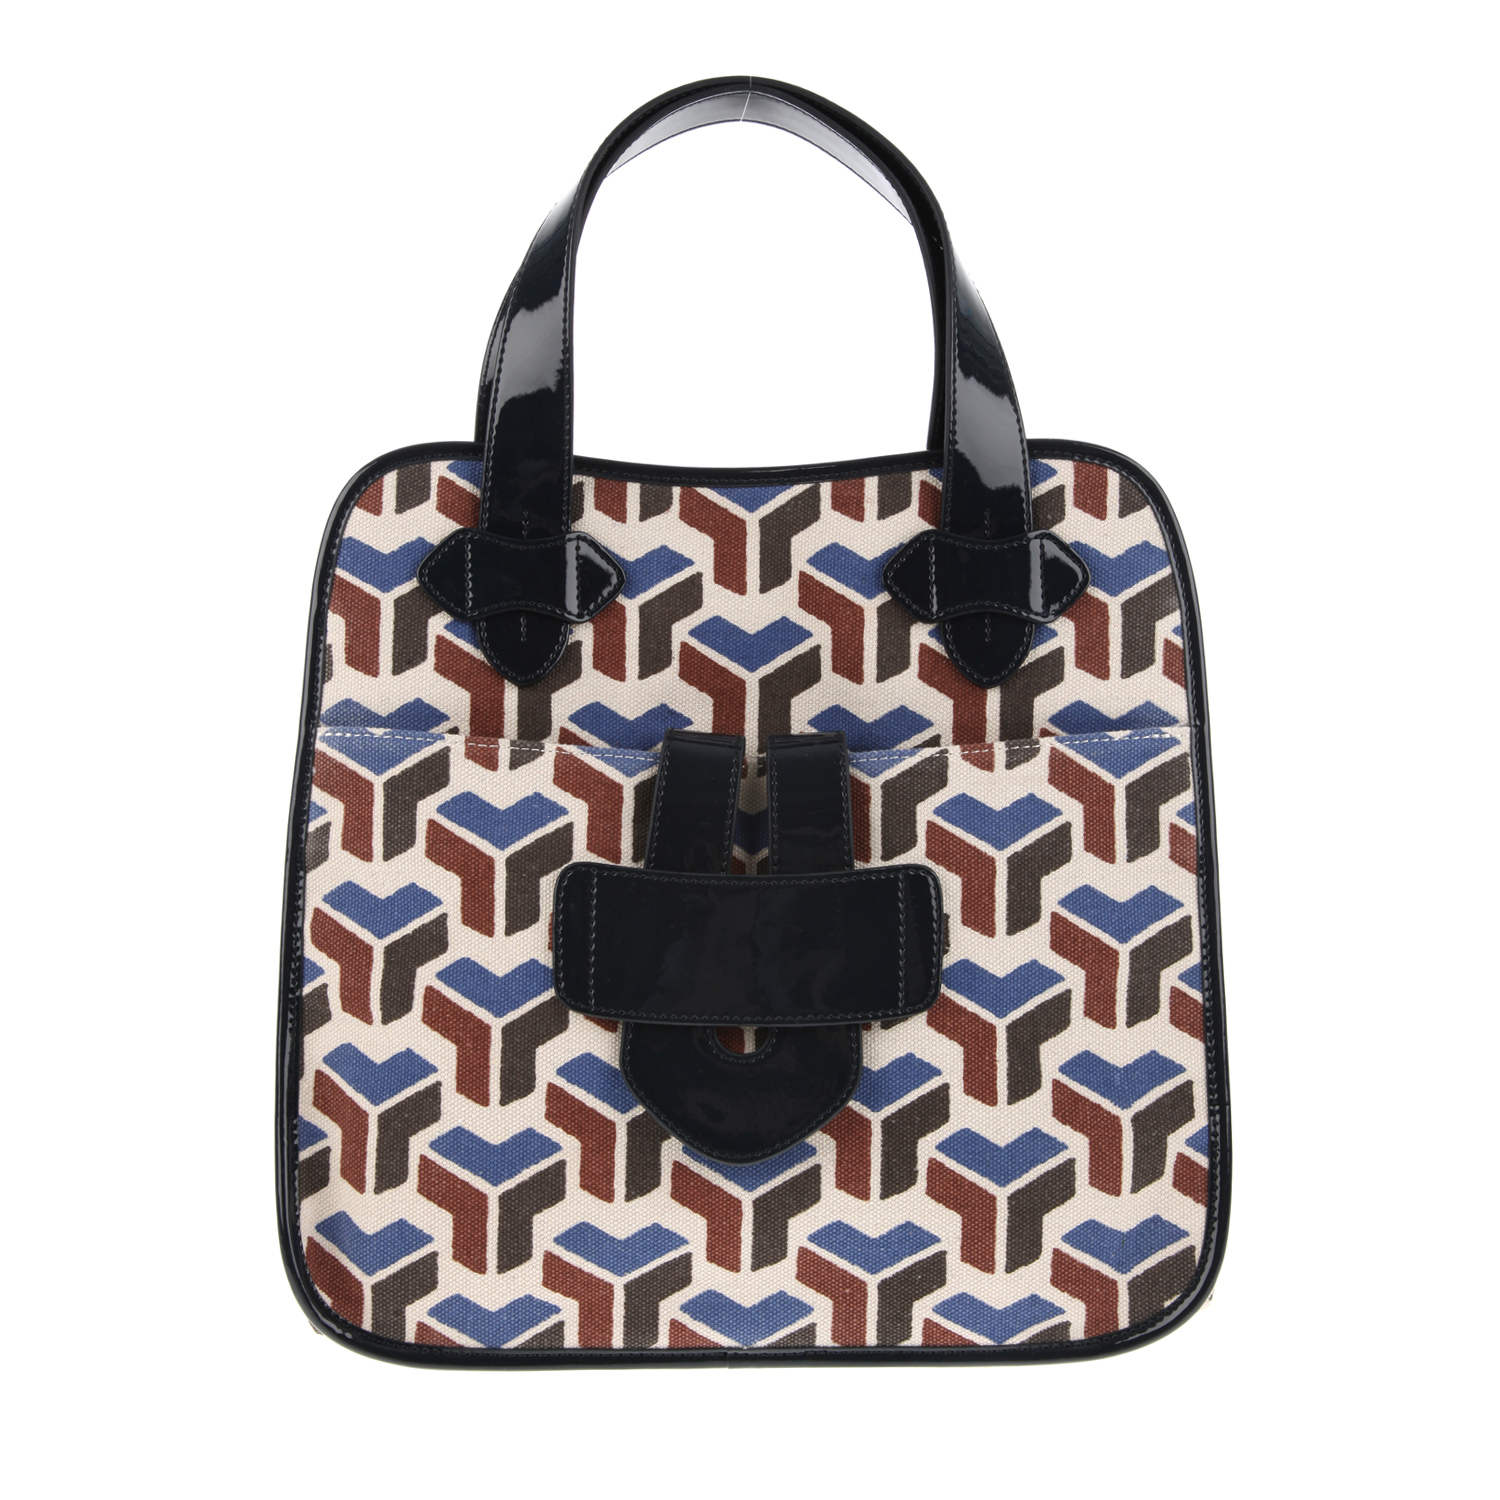 Tila March Zelig Tote Bag in Printed Canvas and Patent Leather in Black ...